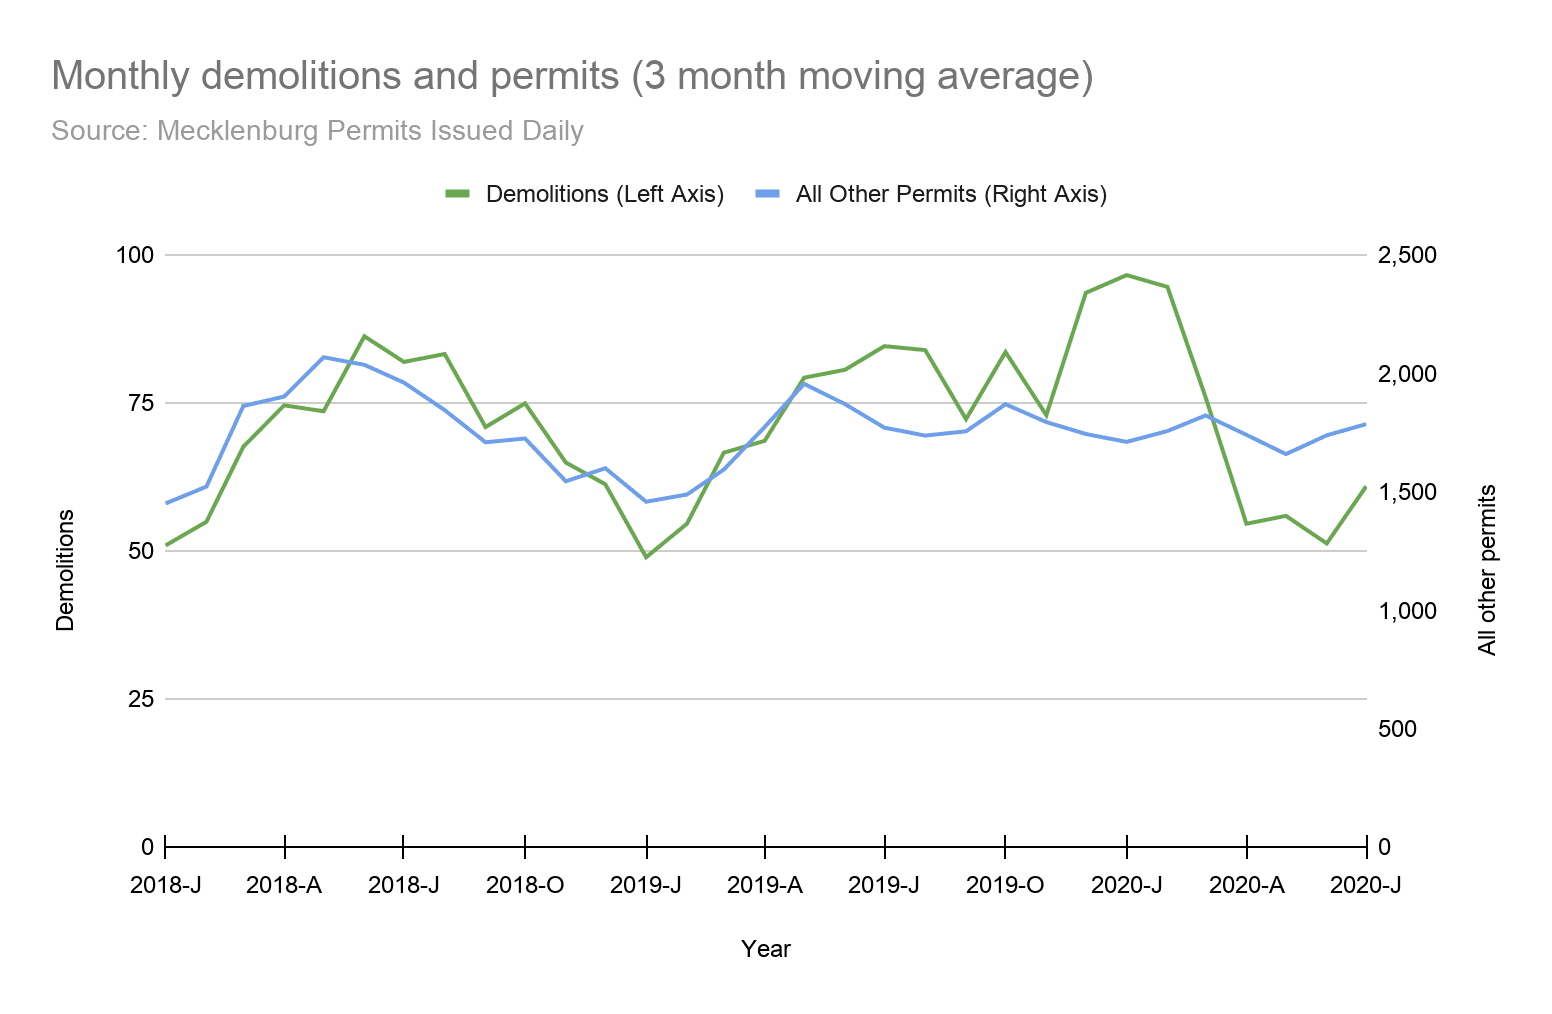 A graph of the monthly demolitions and permits (with a three month moving average) from January 2018 to July 2020